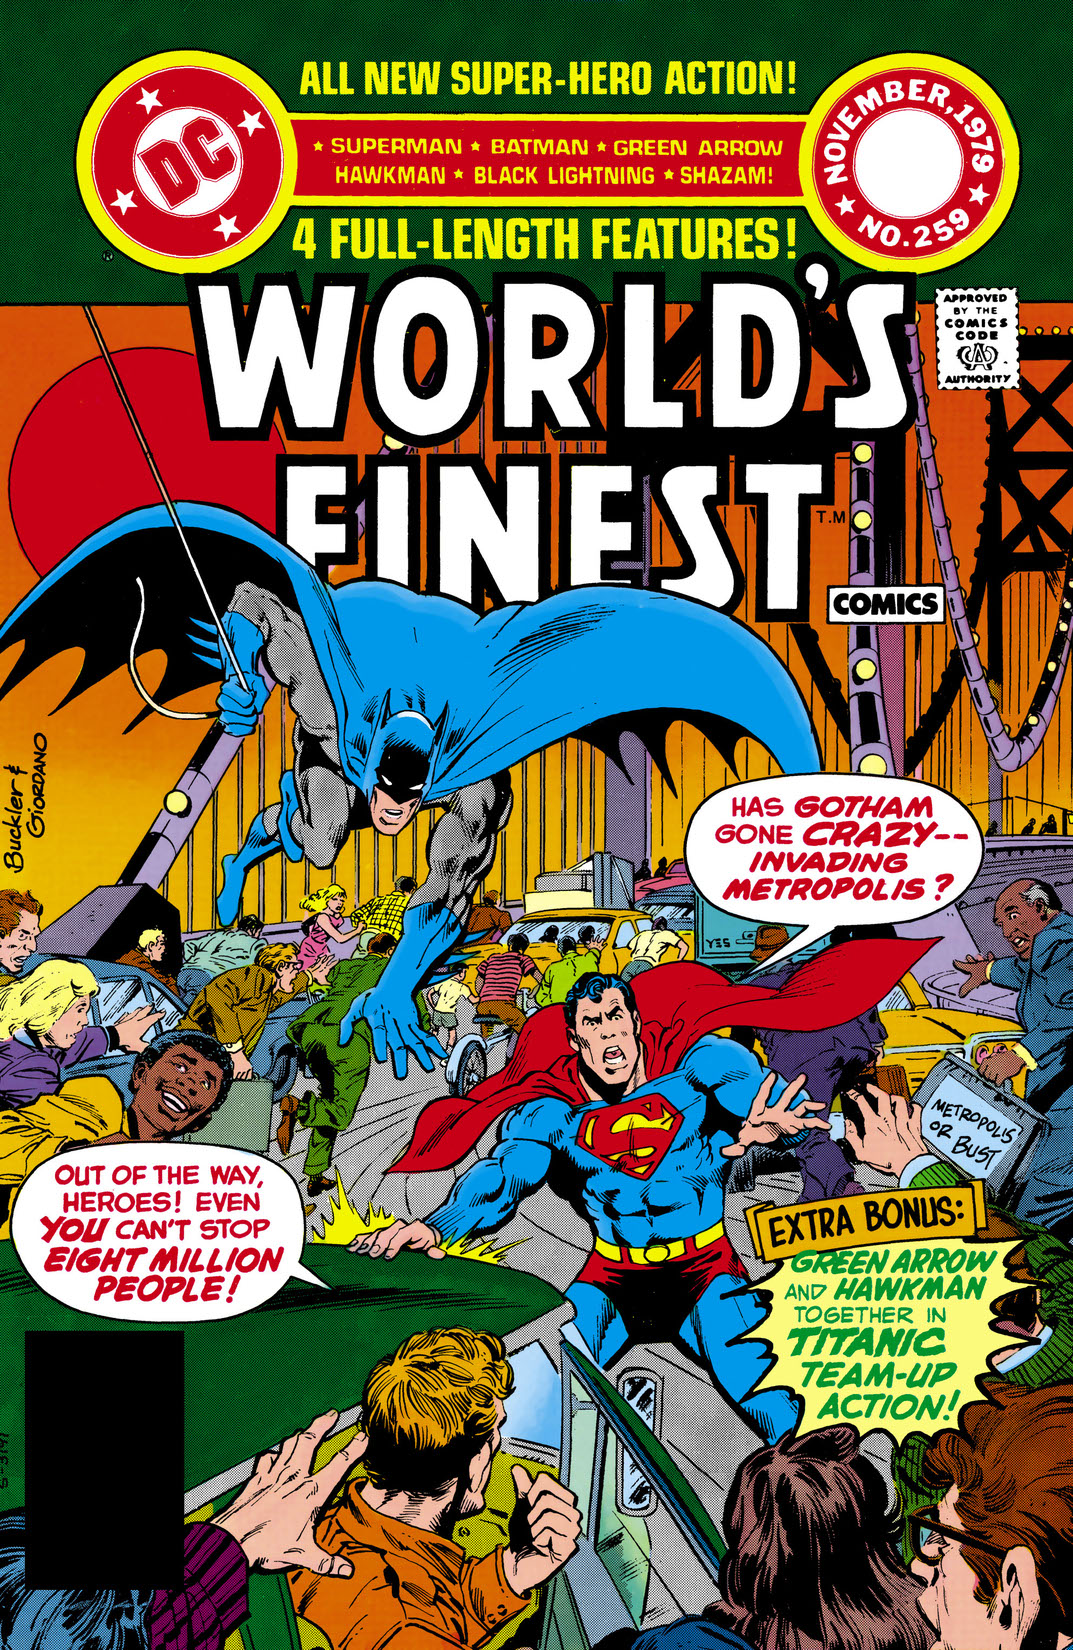 World's Finest Comics (1941-) #259 preview images